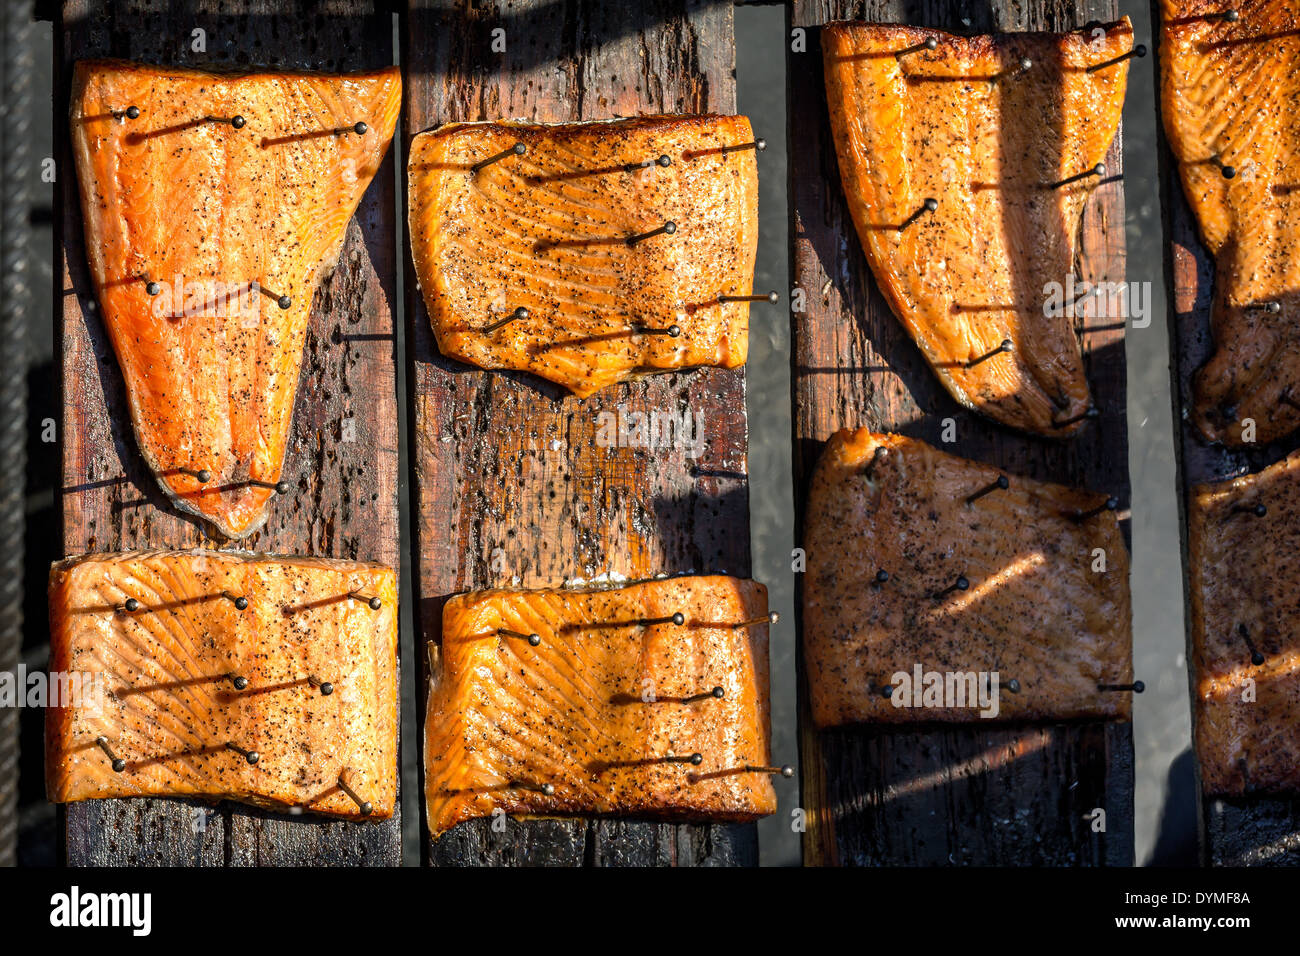 Open fire cooking of salmon, Espoo, Finland Stock Photo